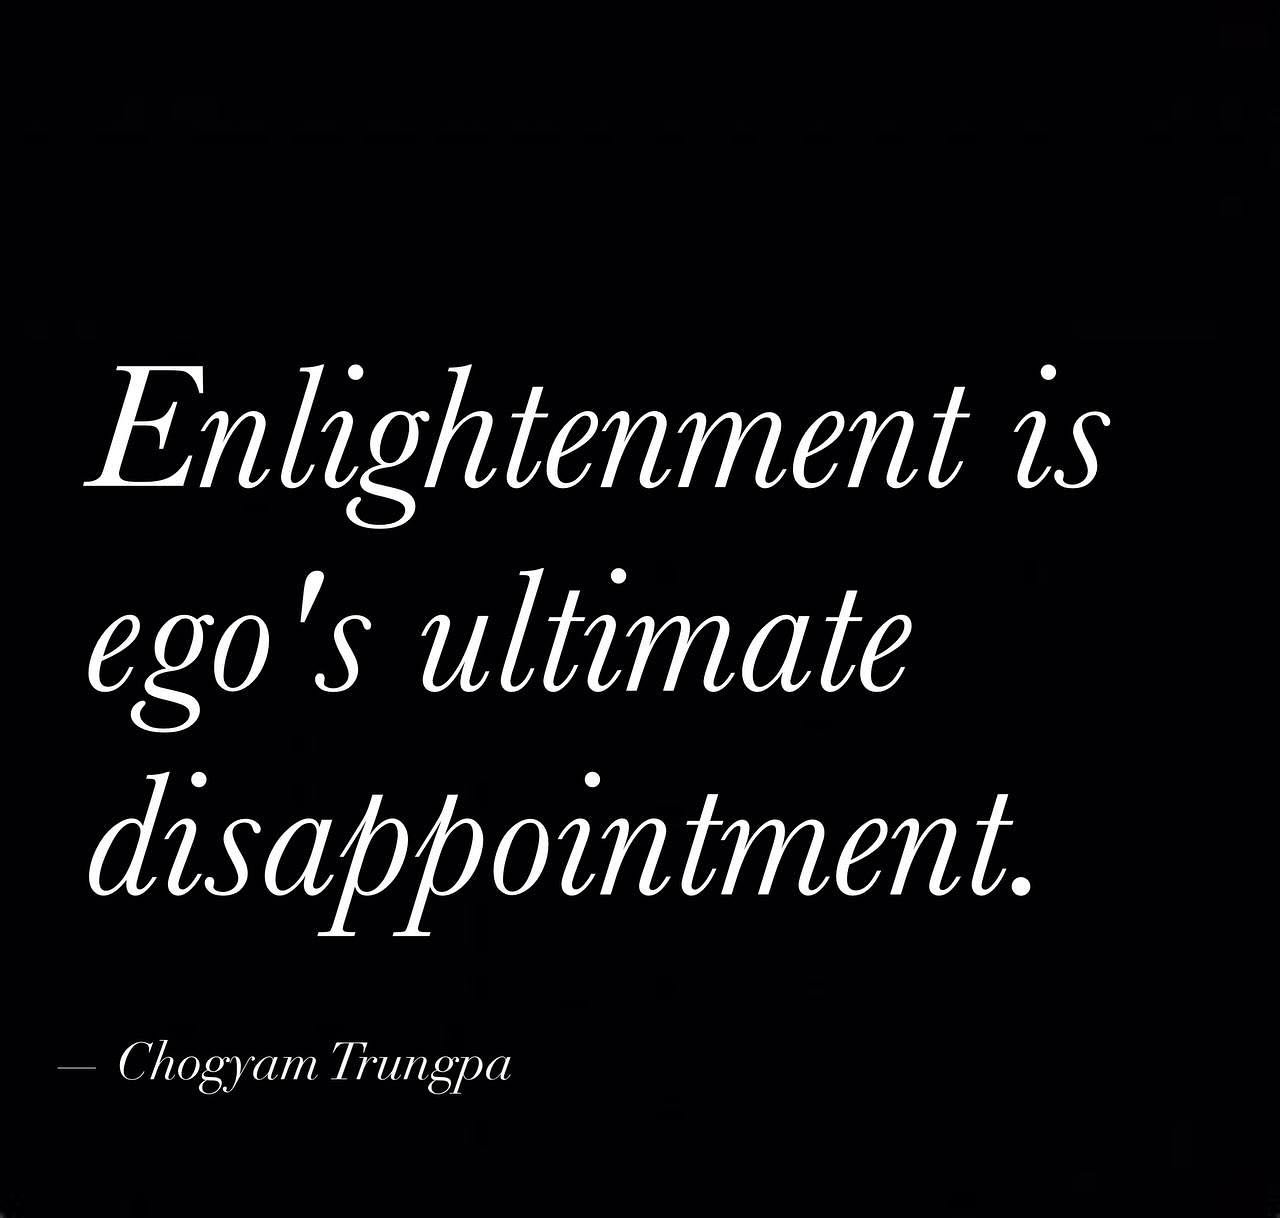 Self growth and enlightenment are disruptors to your status quo, your comfort zone, your ego! 

The Light of who you Truly are shines on the shadows of the ego and shows you that the ego is holding up a house made of cards. The ego thinks it&rsquo;s 